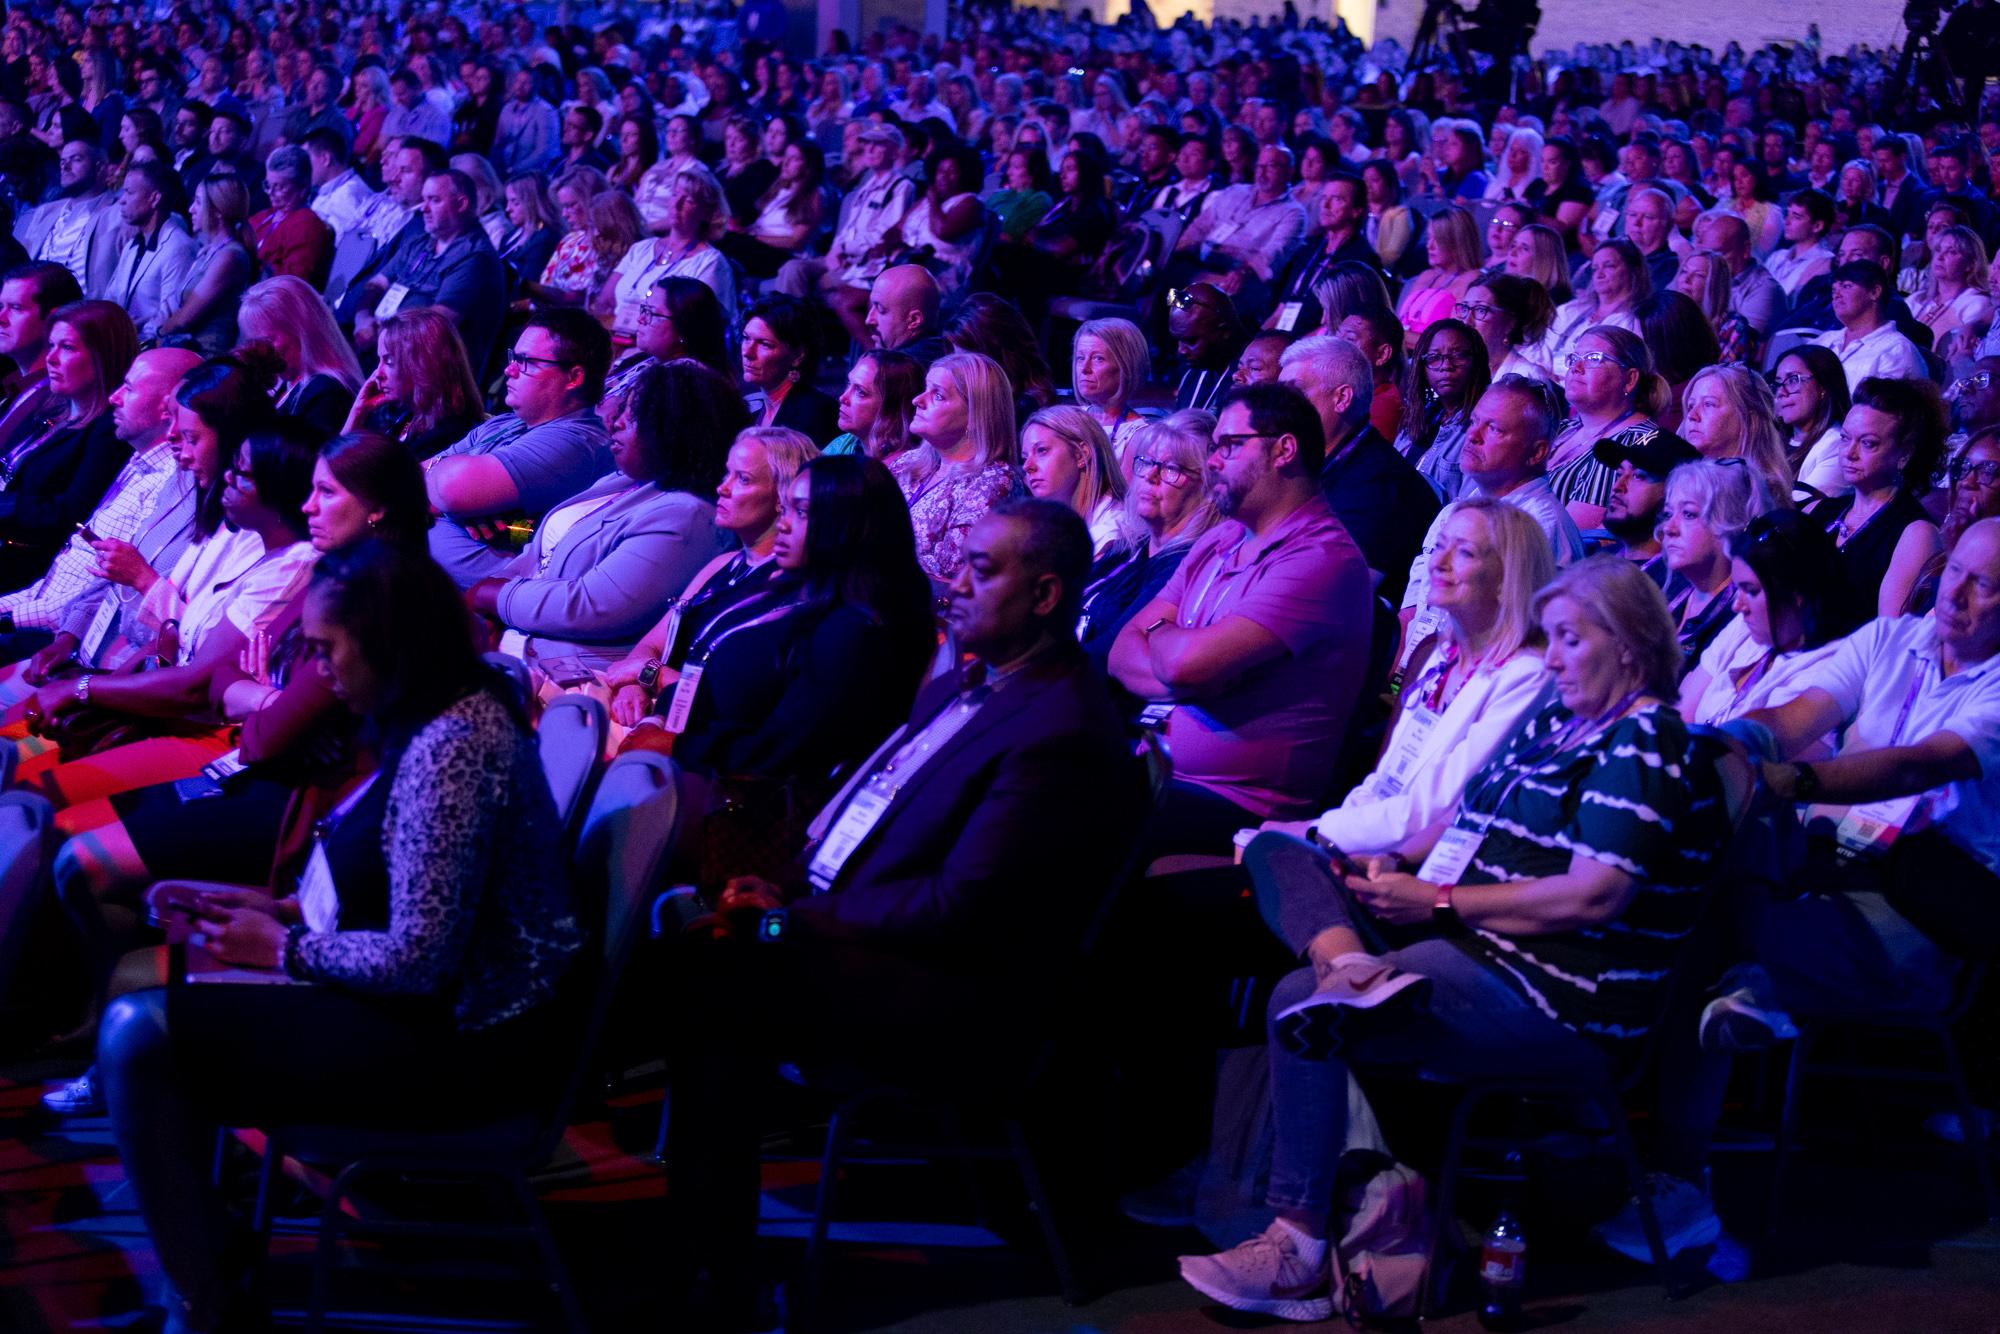 Apartmentalize attendees listen intently to Medal of Honor recipient Kyle Carpenter, Day 2 General Session Keynote Speaker.